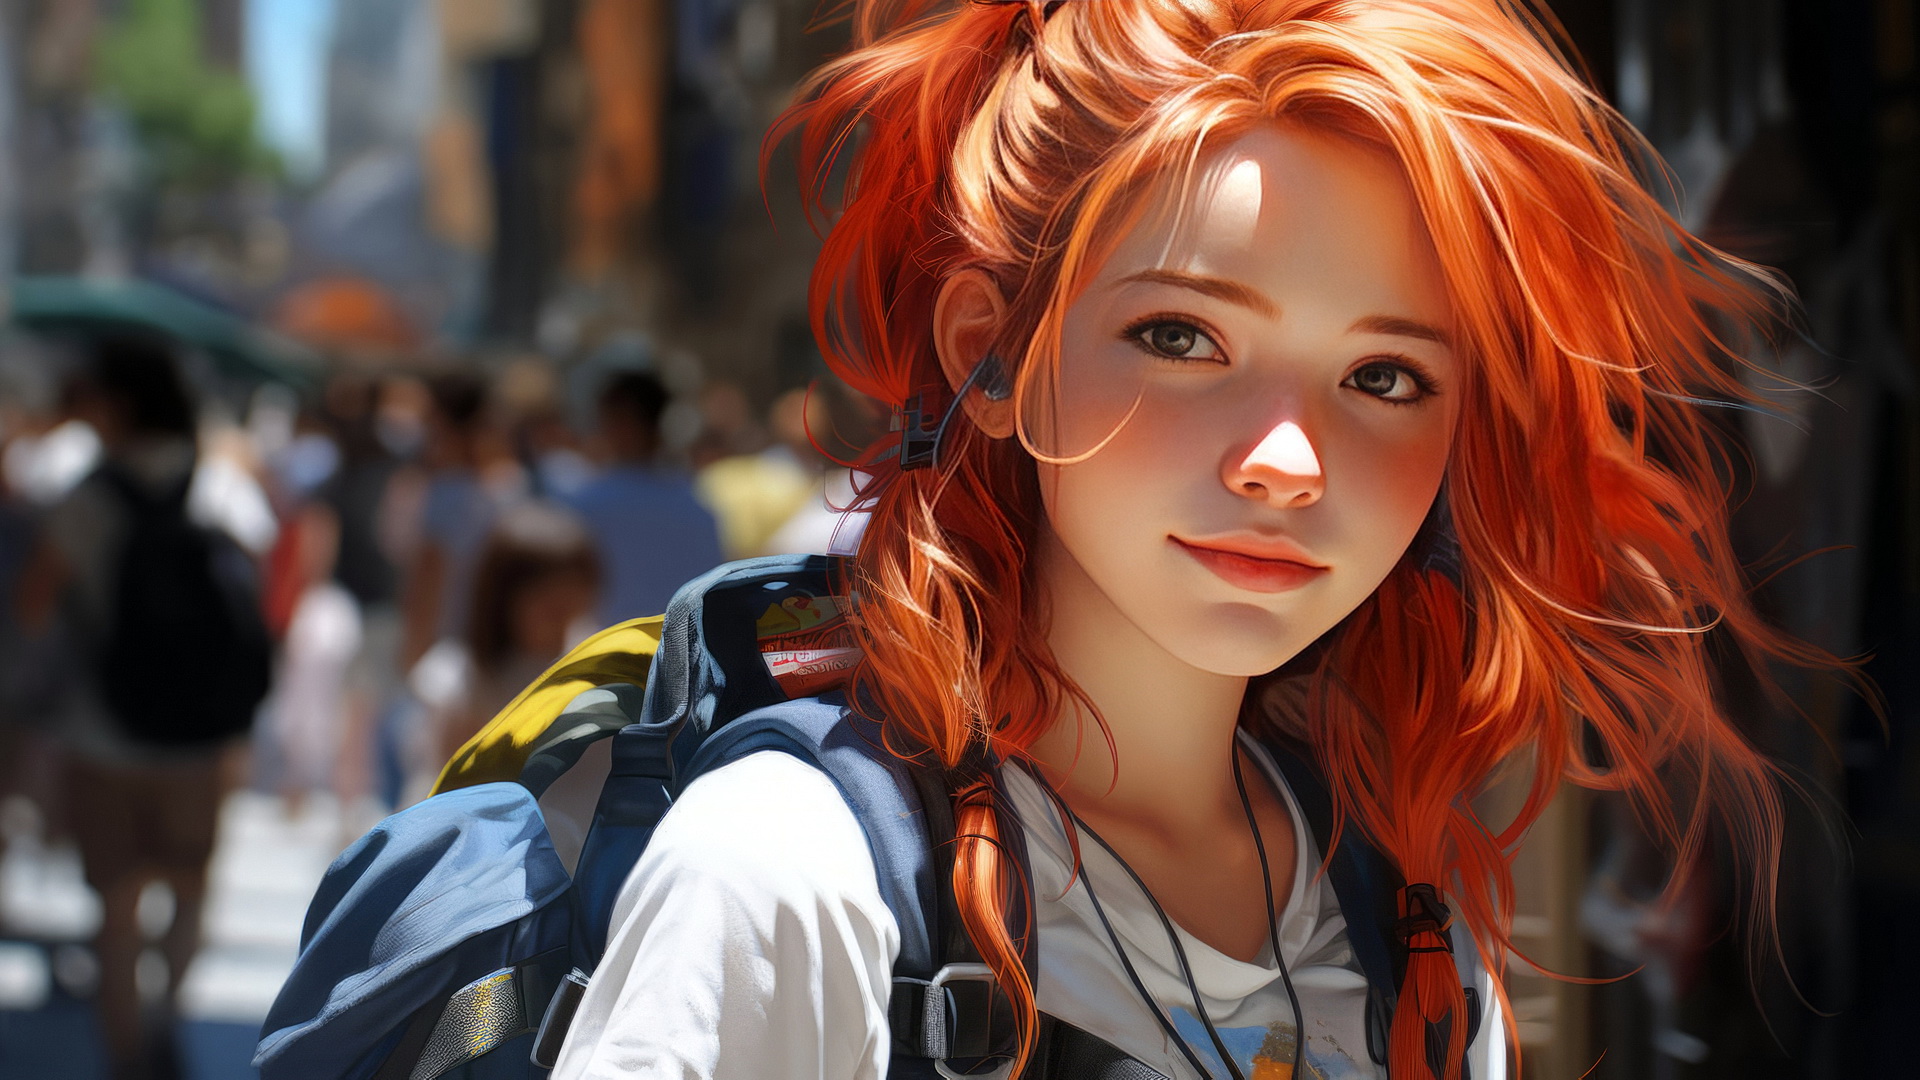 A red-haired girl with a backpack on a city street